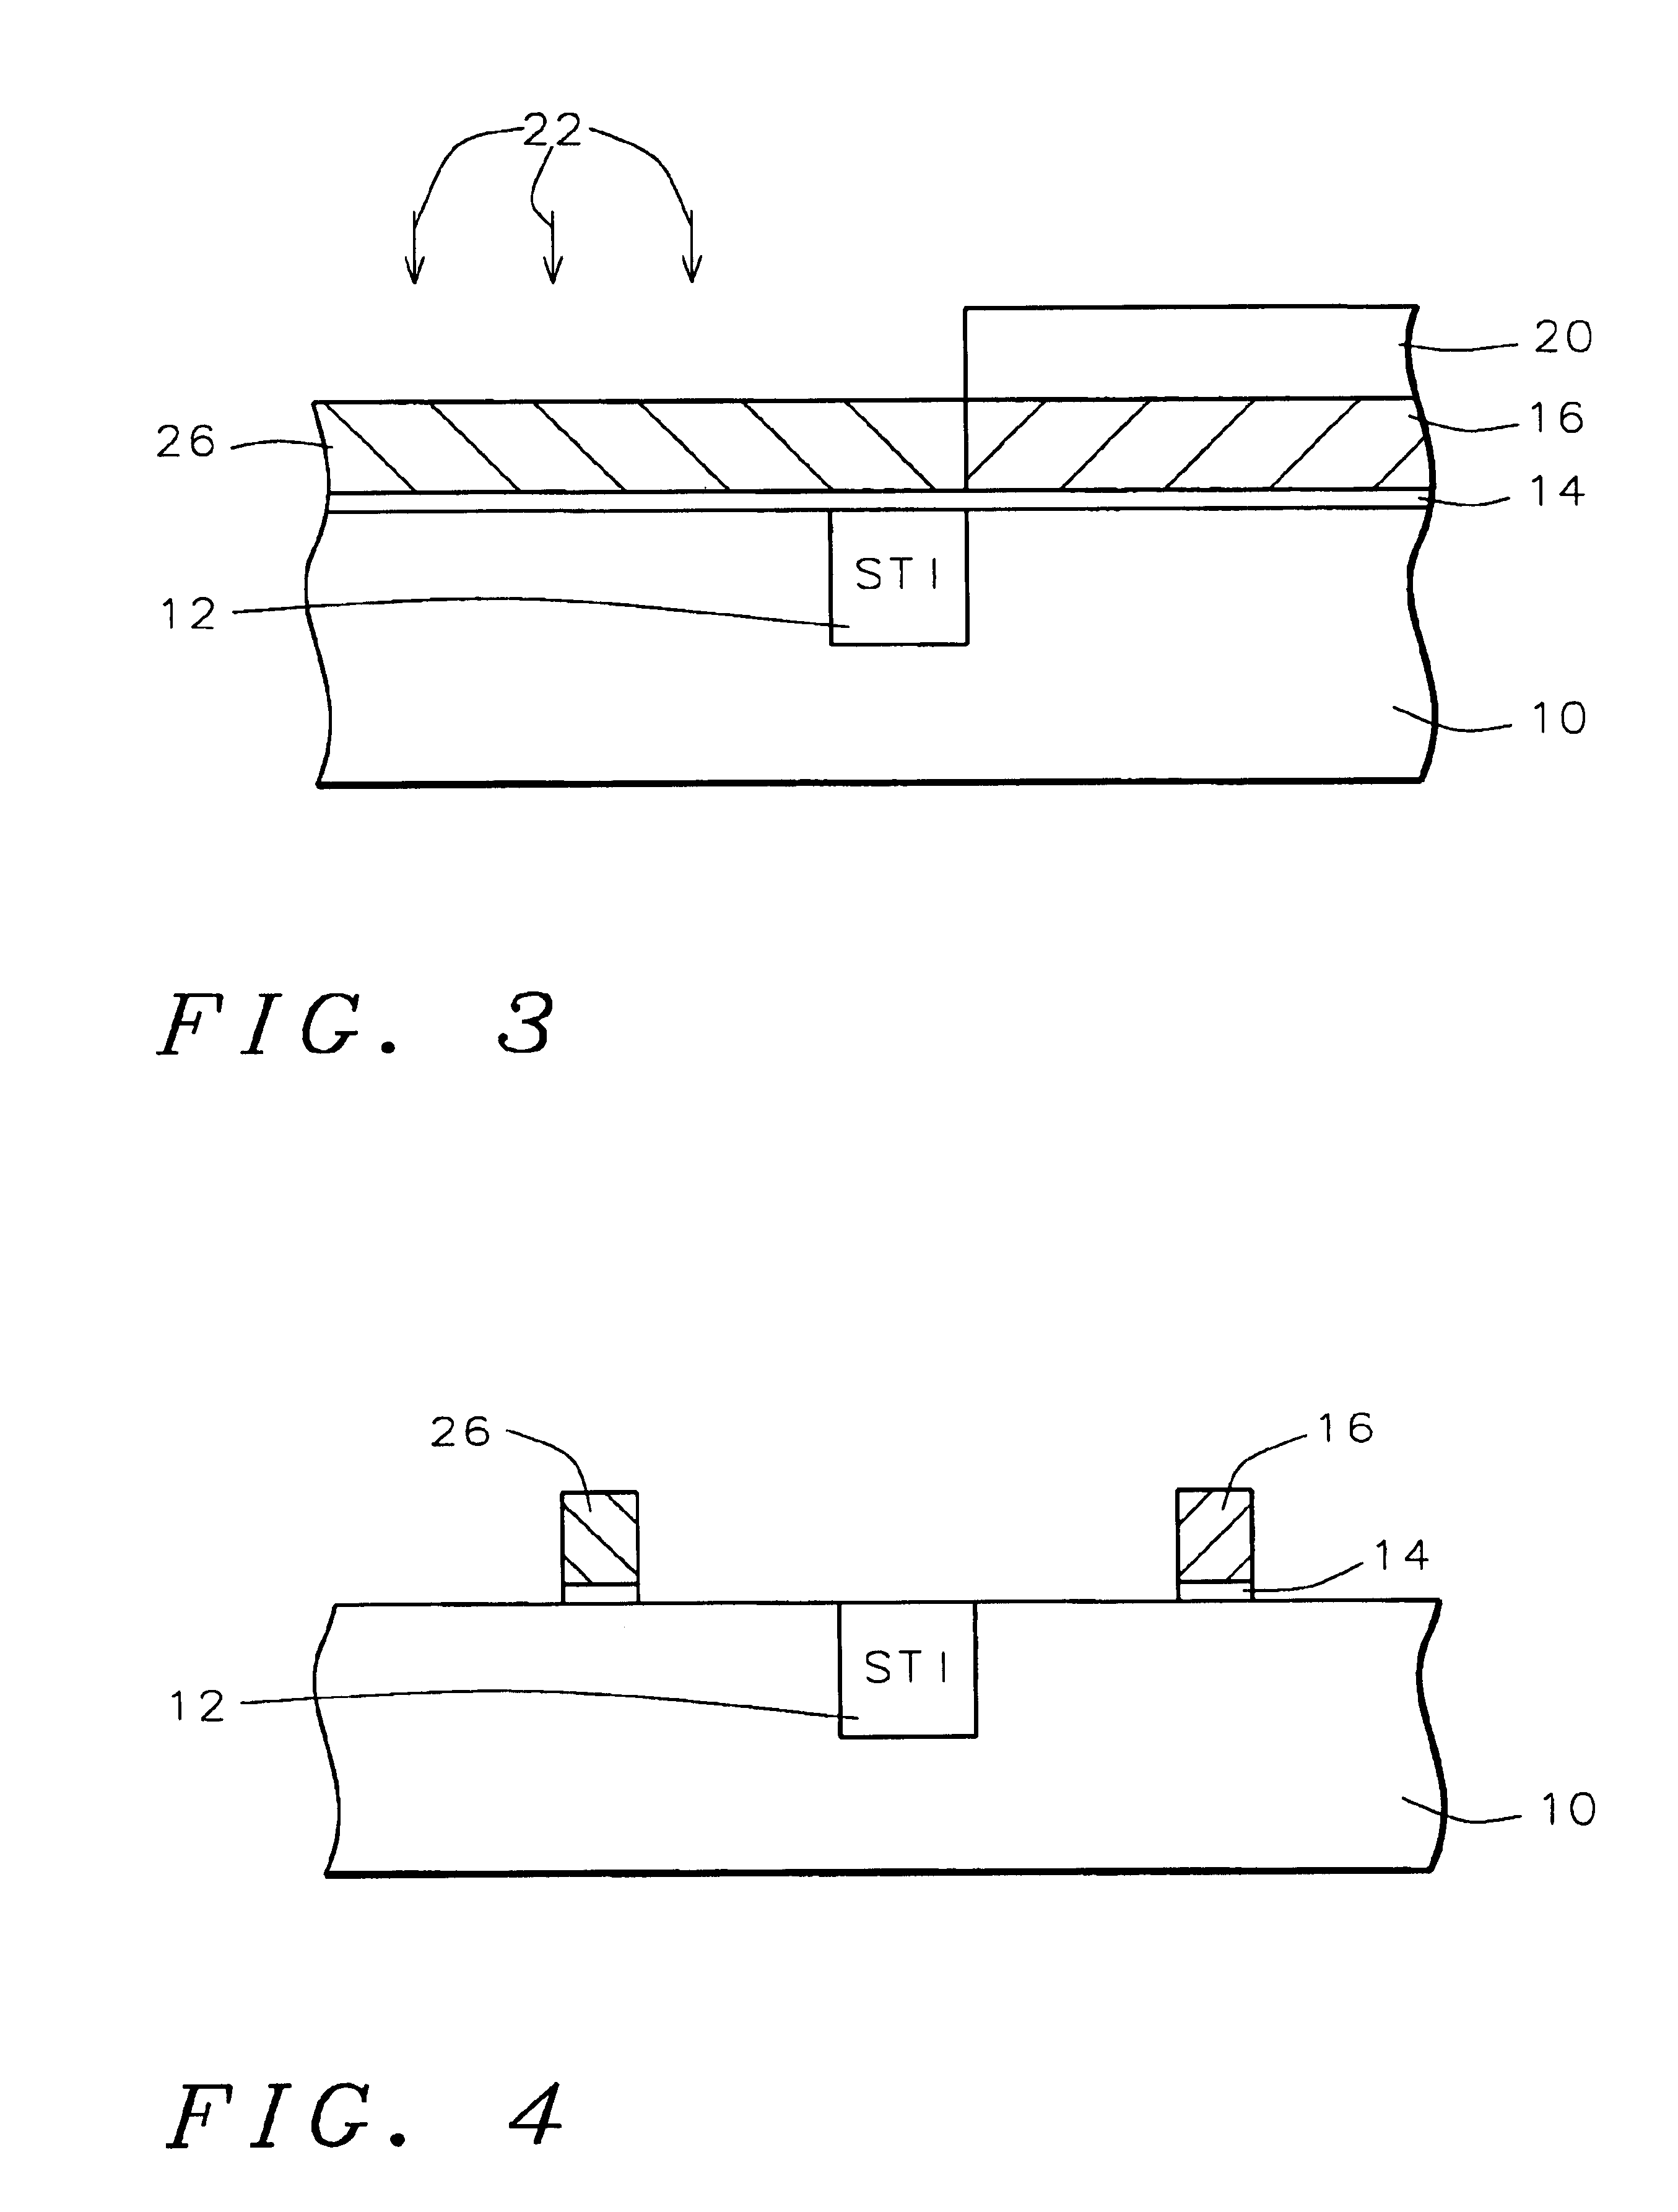 Methods to form dual metal gates by incorporating metals and their conductive oxides